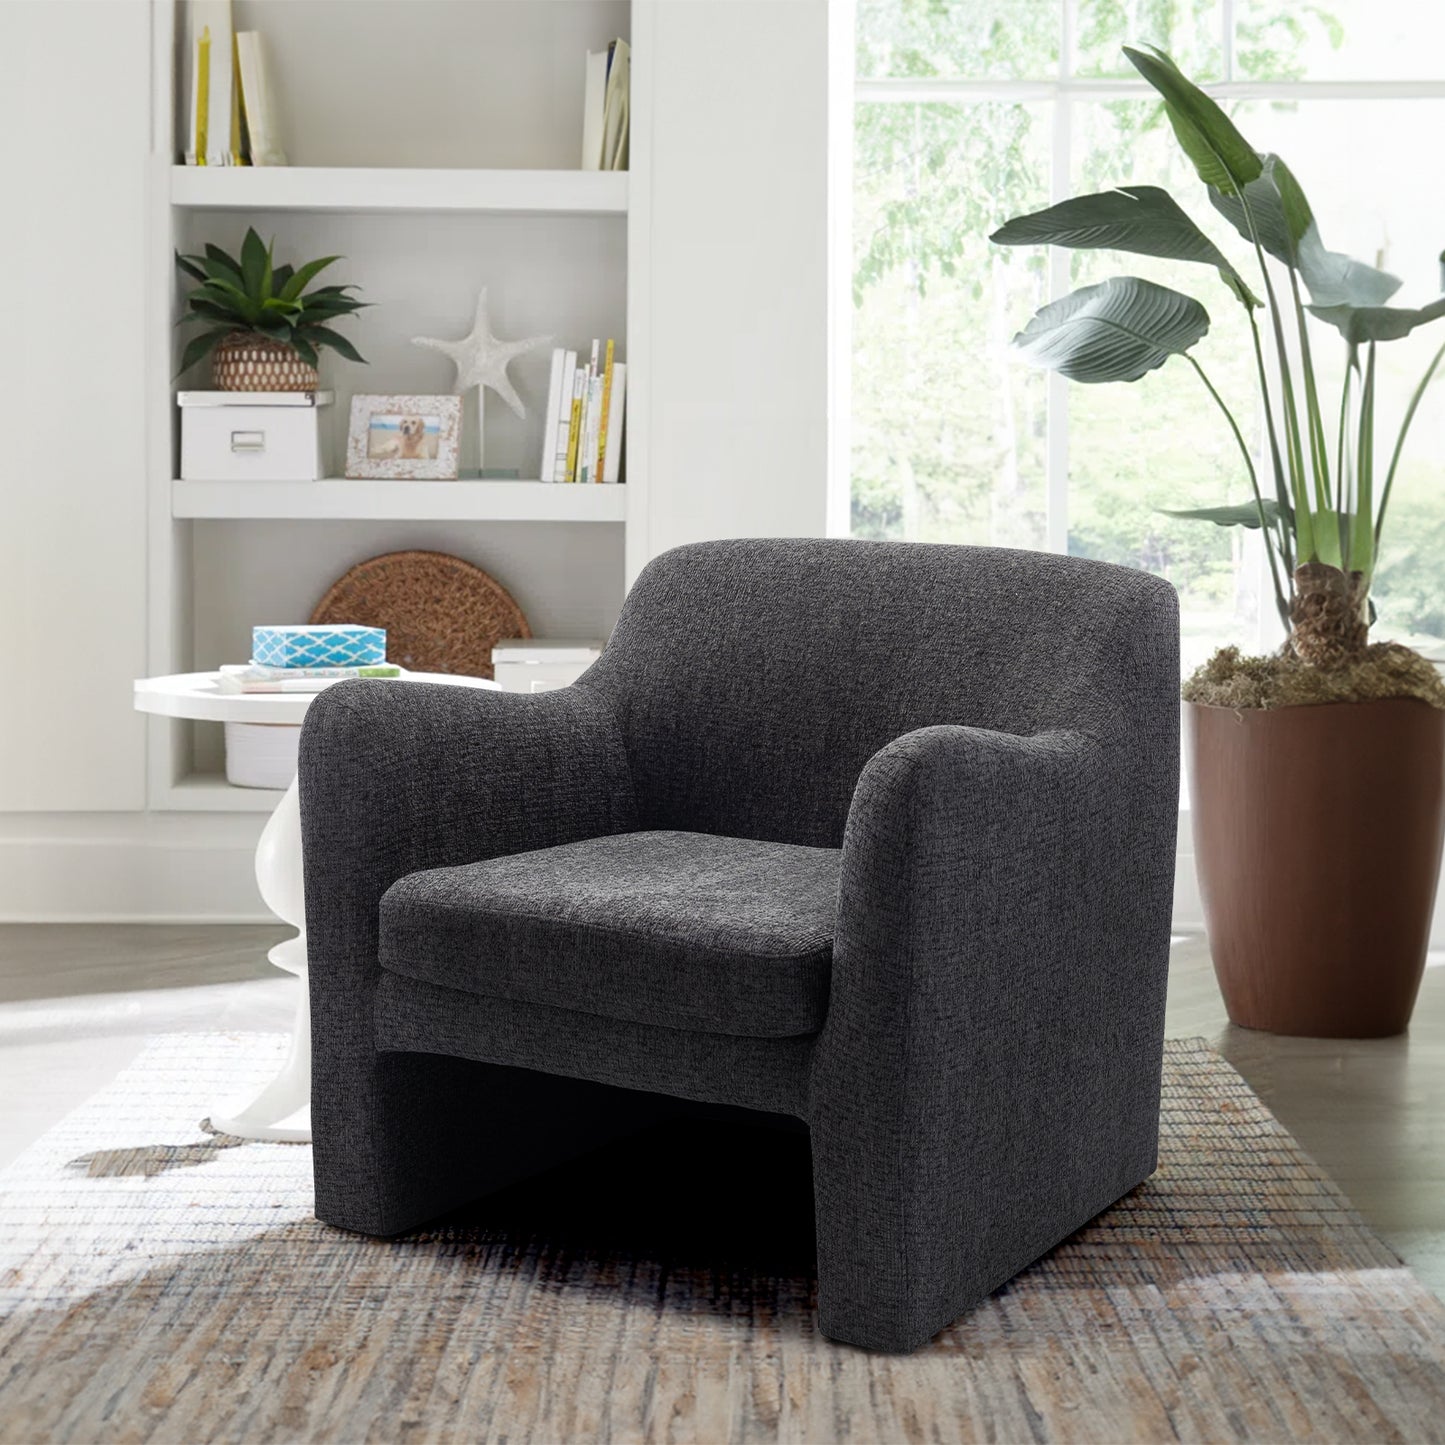 COLAMY Comfy Woolen Fabric Accent Chair Soft Padded Armchair